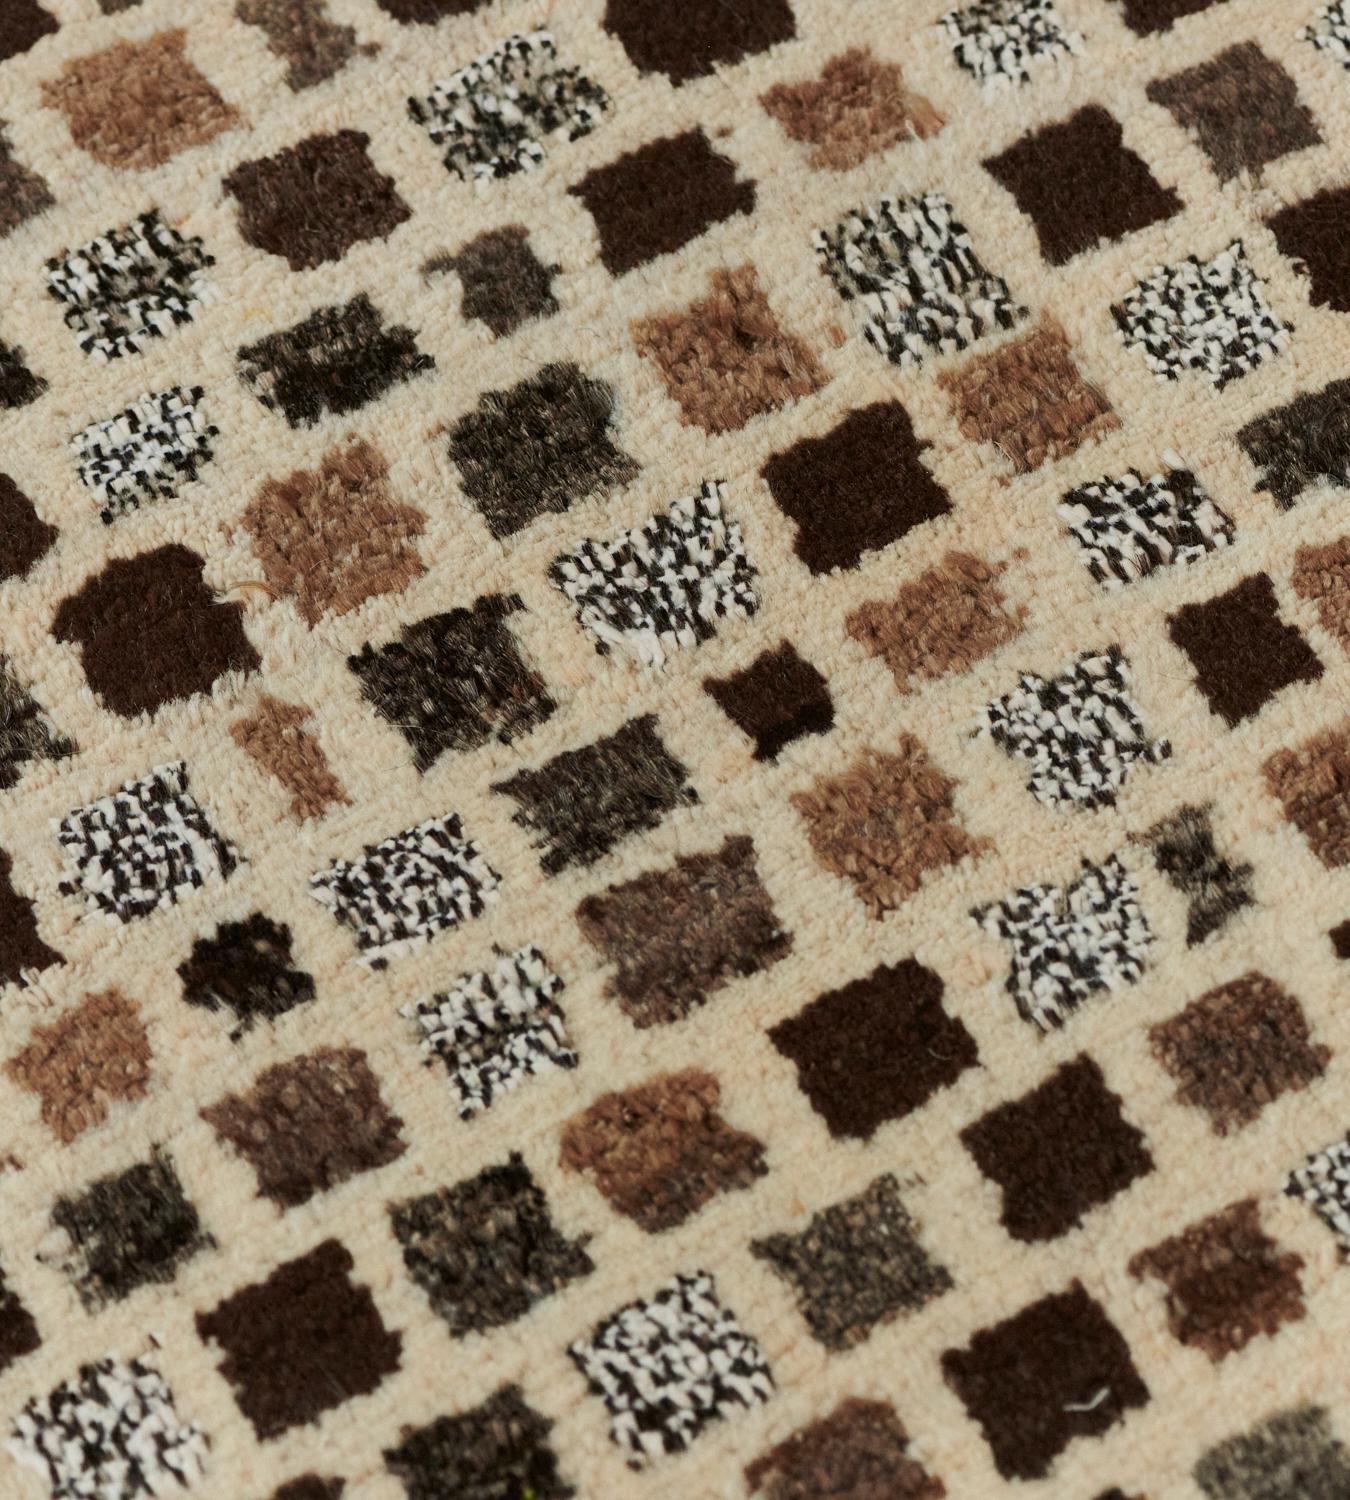 This hand-woven Turkish Deco rug has an overall field of mole brown, grey, and dark brown cells on a camel field.